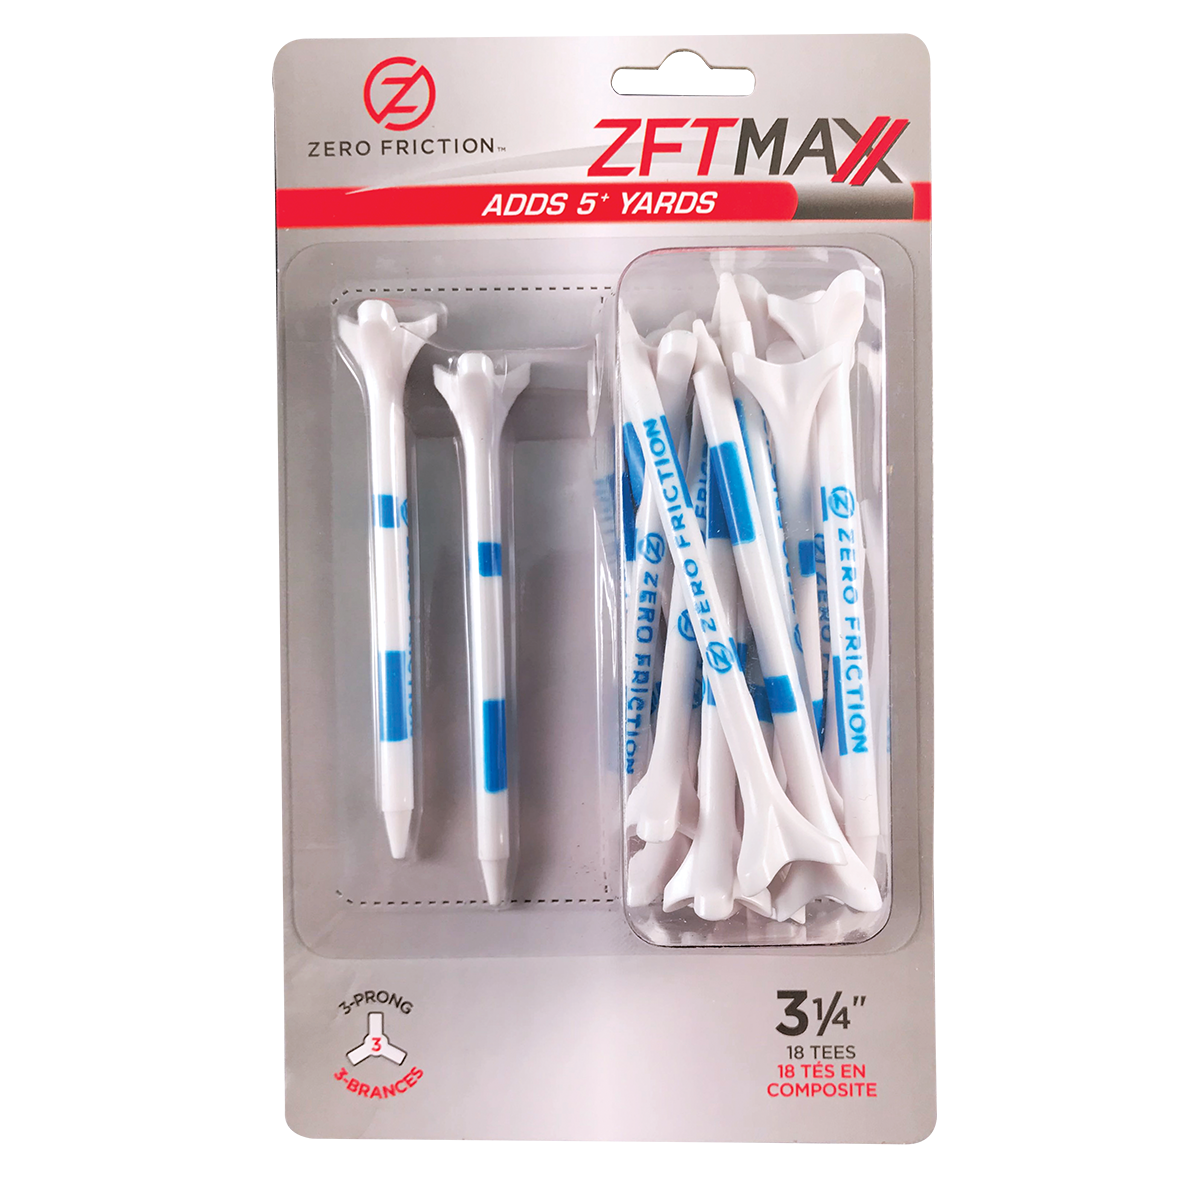 ZF MAXX 3-PRONG 3-1/4" TEES - 18 PACK